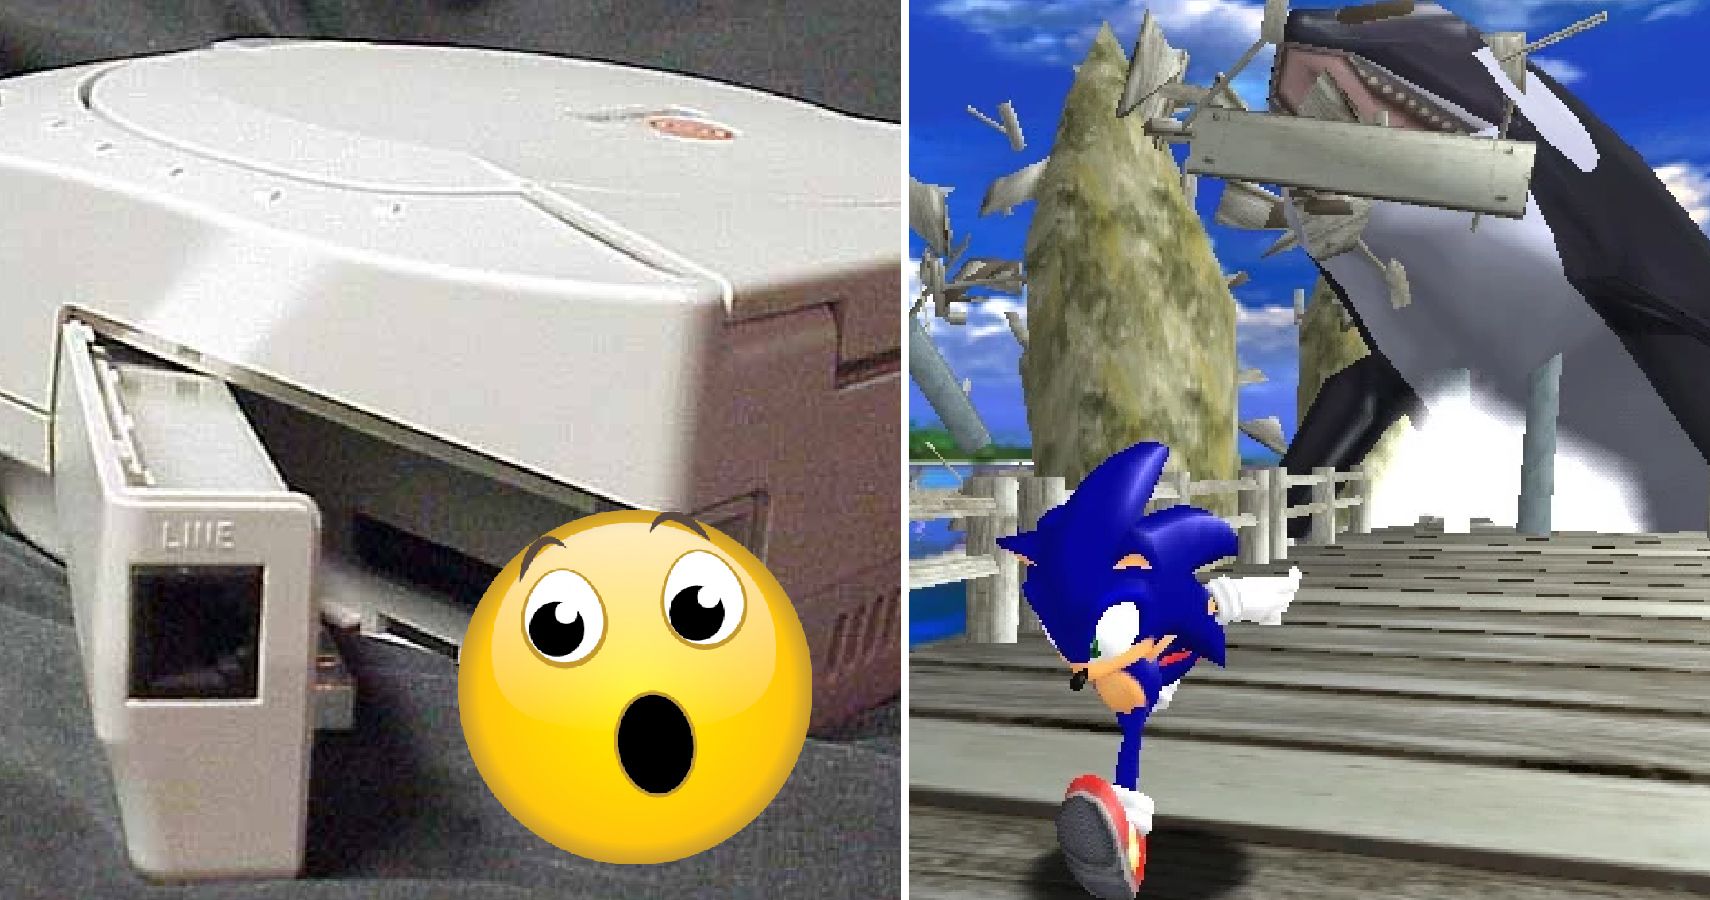 6 things a Sega Dreamcast Classic would need to live up to its